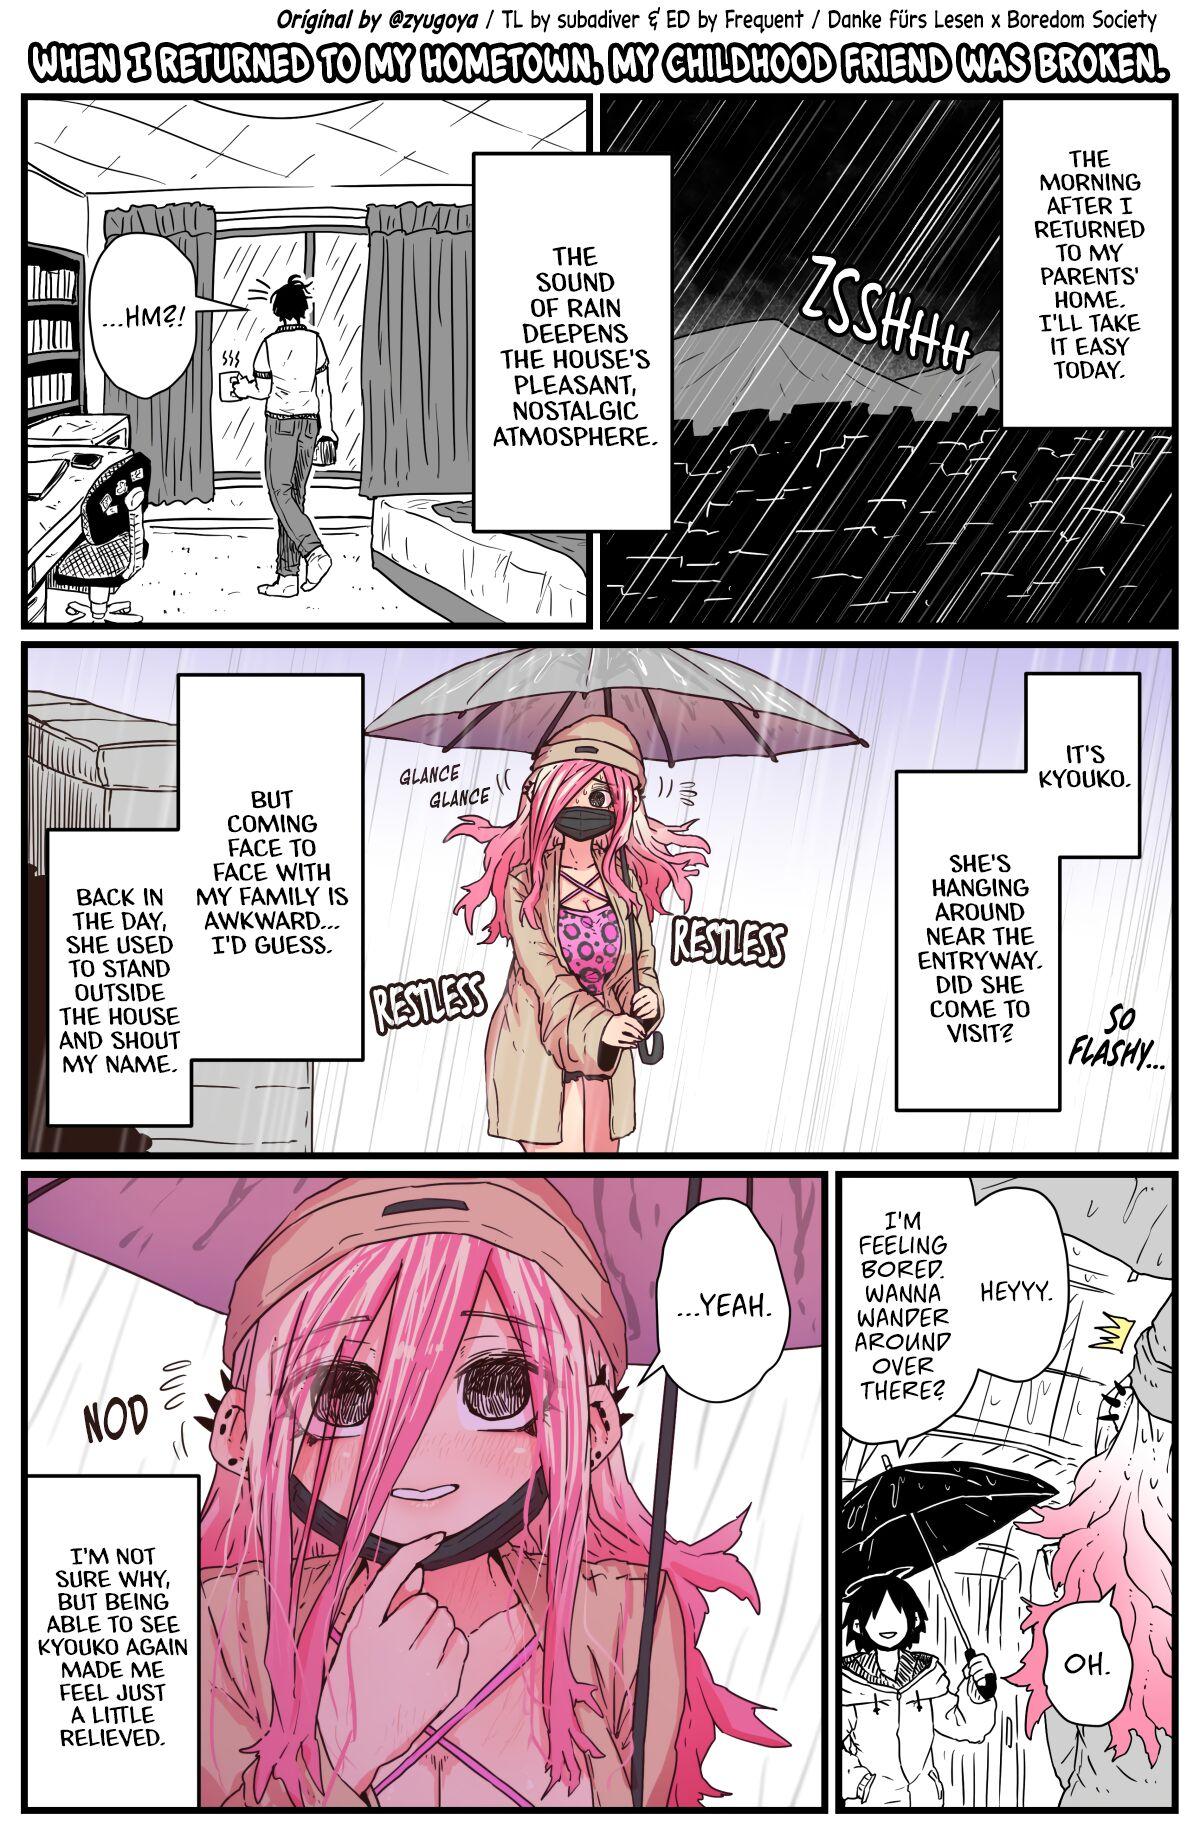 Cowgirl When I Returned to My Hometown, My Childhood Friend was Broken - Original Highschool - Page 5